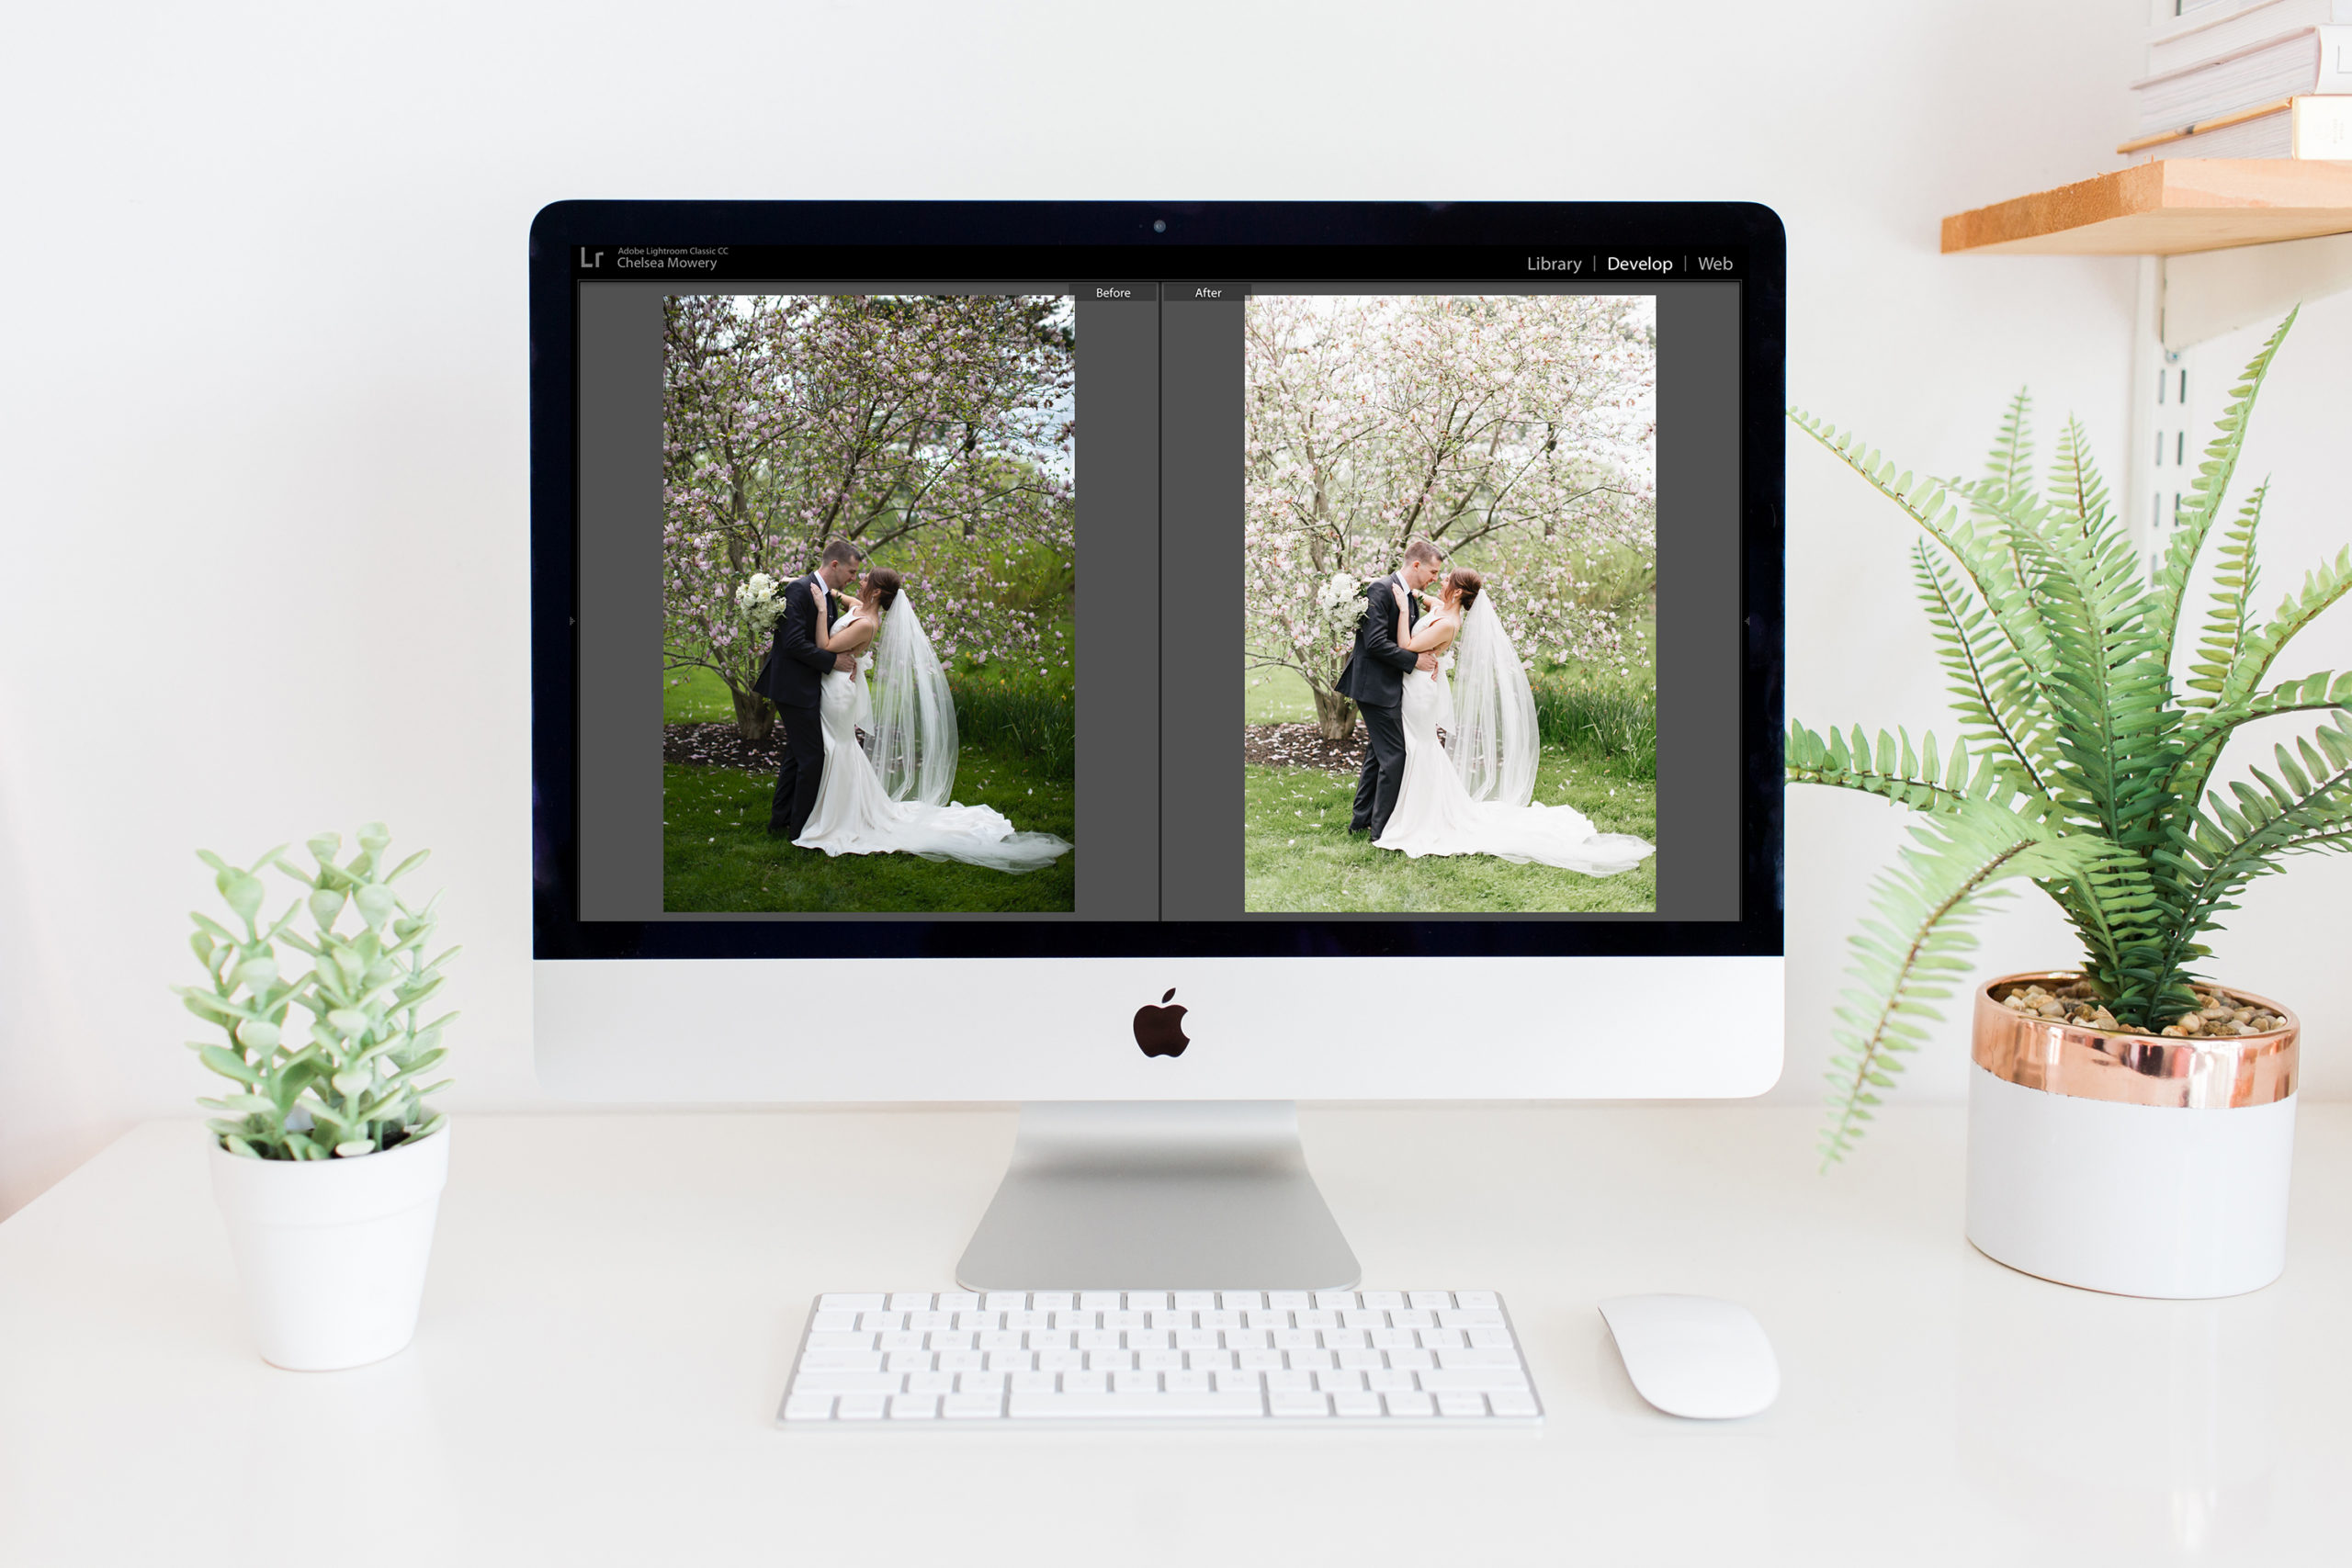 wedding photography outsourcing | Lightroom editing